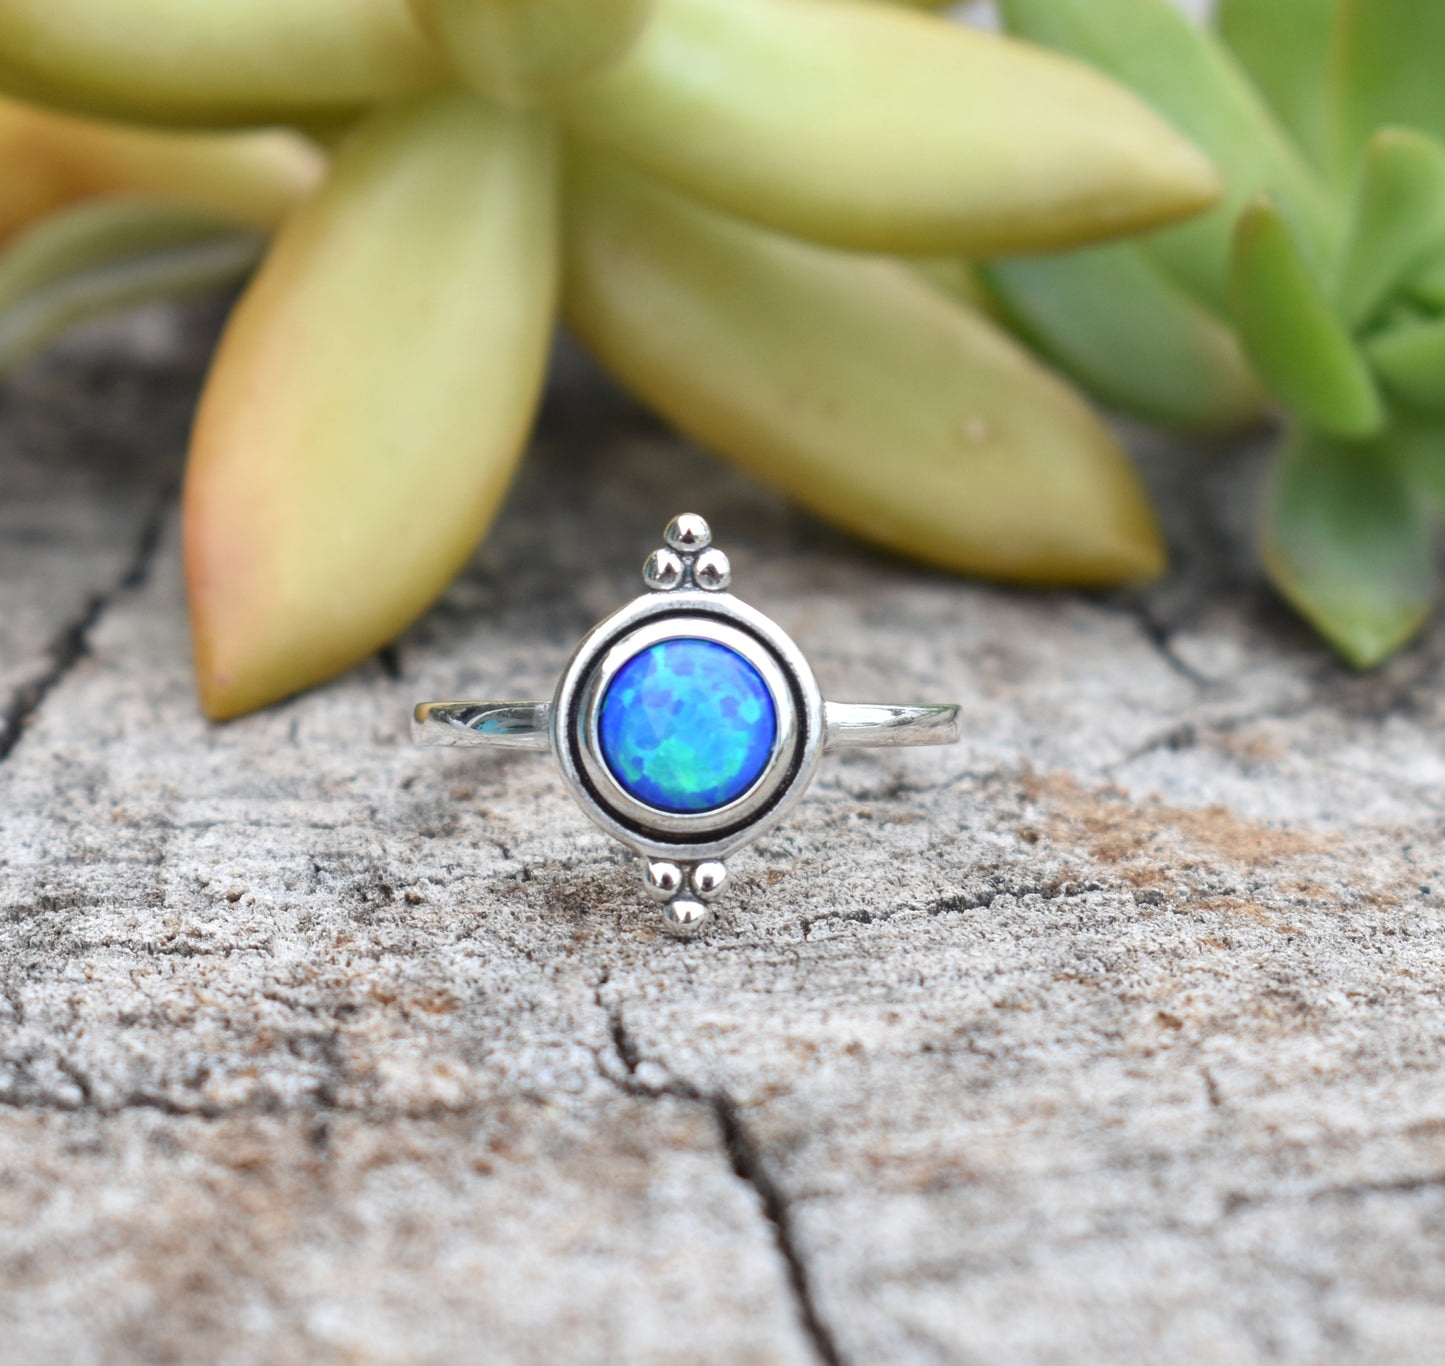 Blue Opal Engagement Ring- Opal Ring, October Birthstone- Sterling Silver